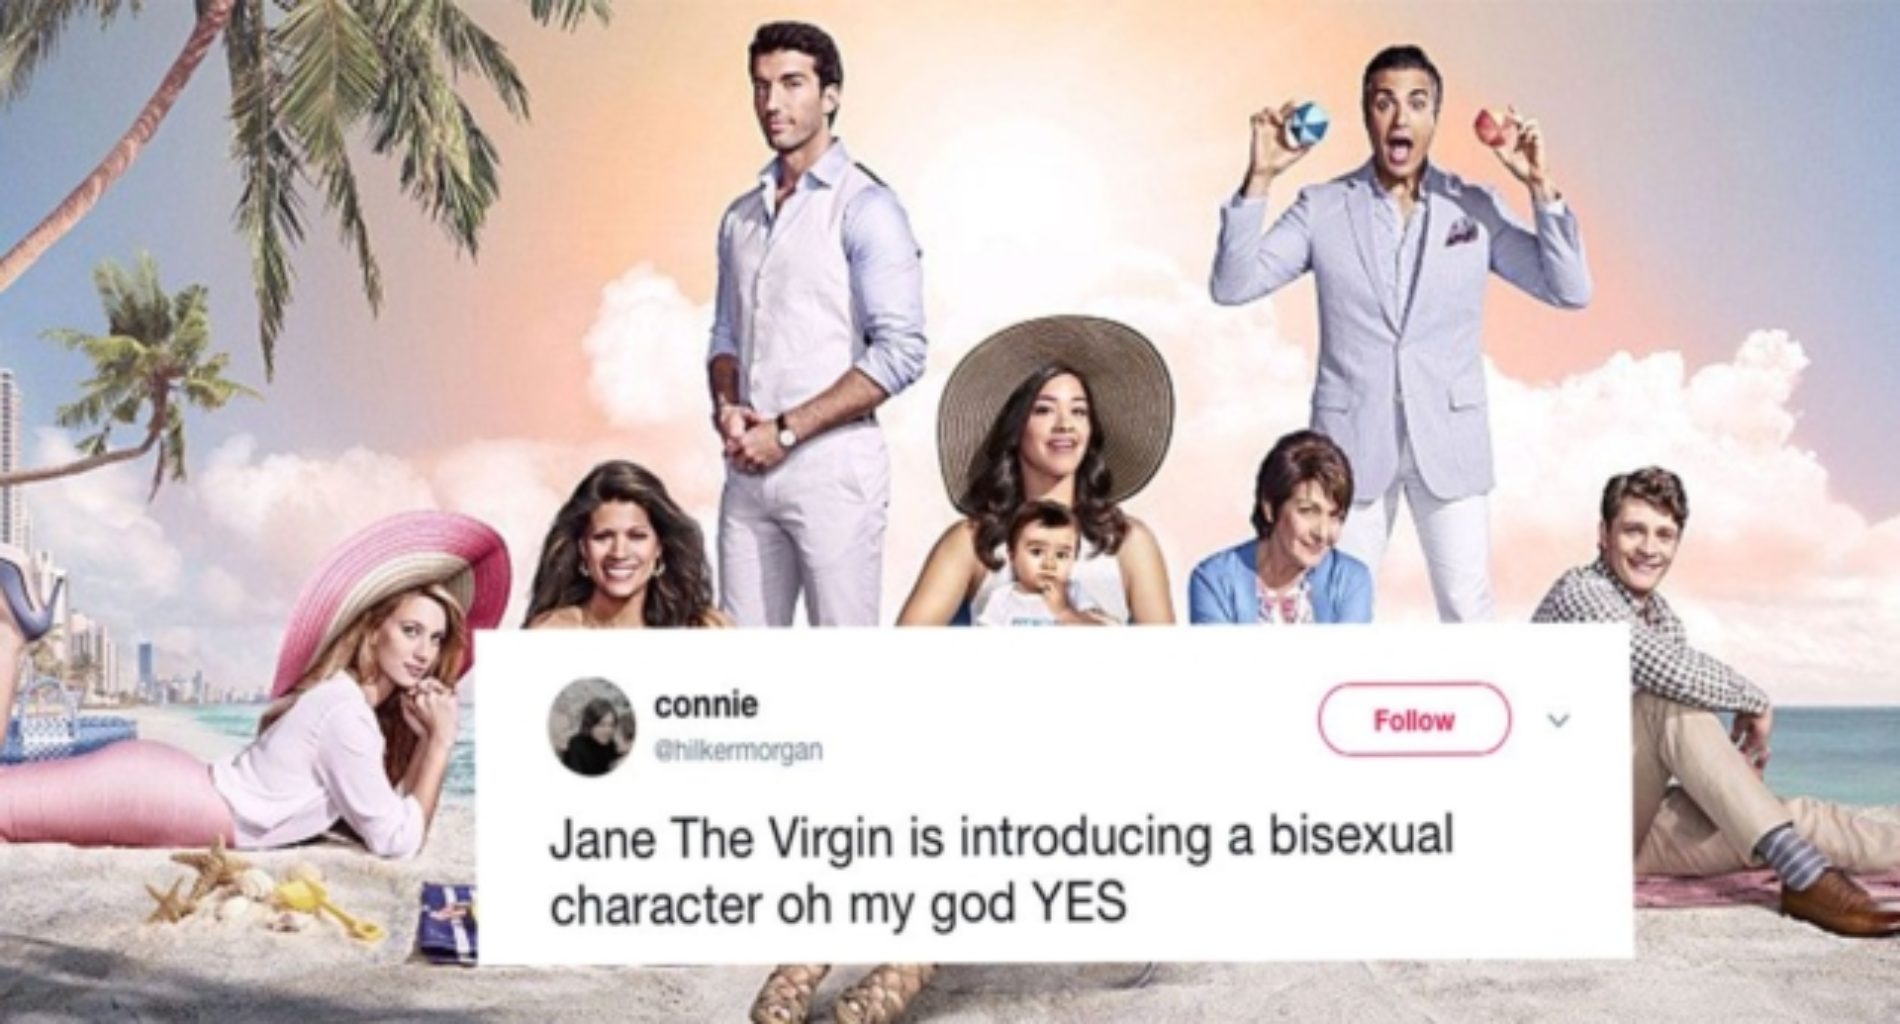 ‘Jane the Virgin’ introduces a bisexual character and fans are excited